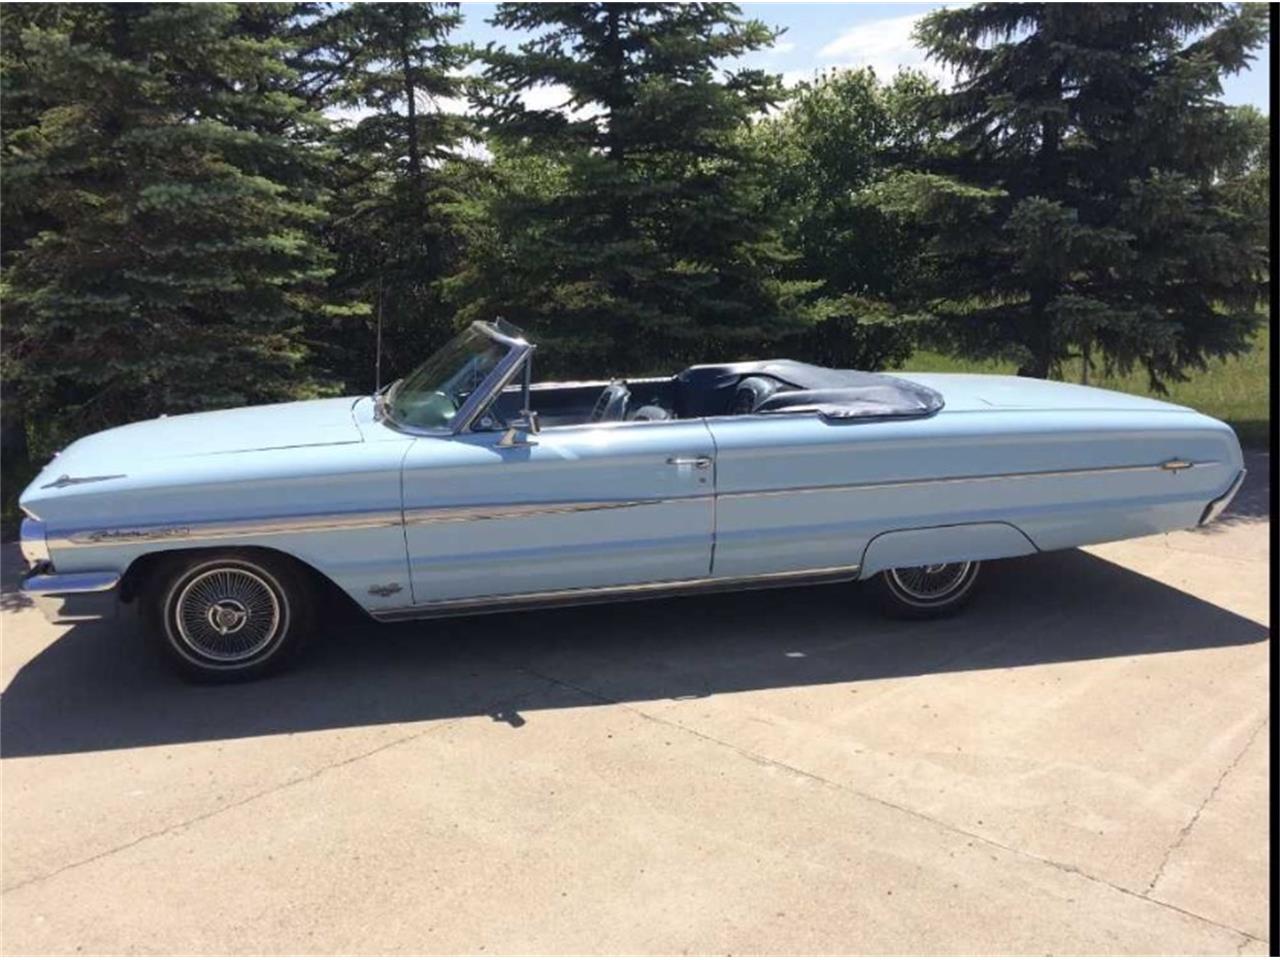 For Sale: 1964 Ford Galaxie in Hobart, Indiana for sale in Hobart, IN